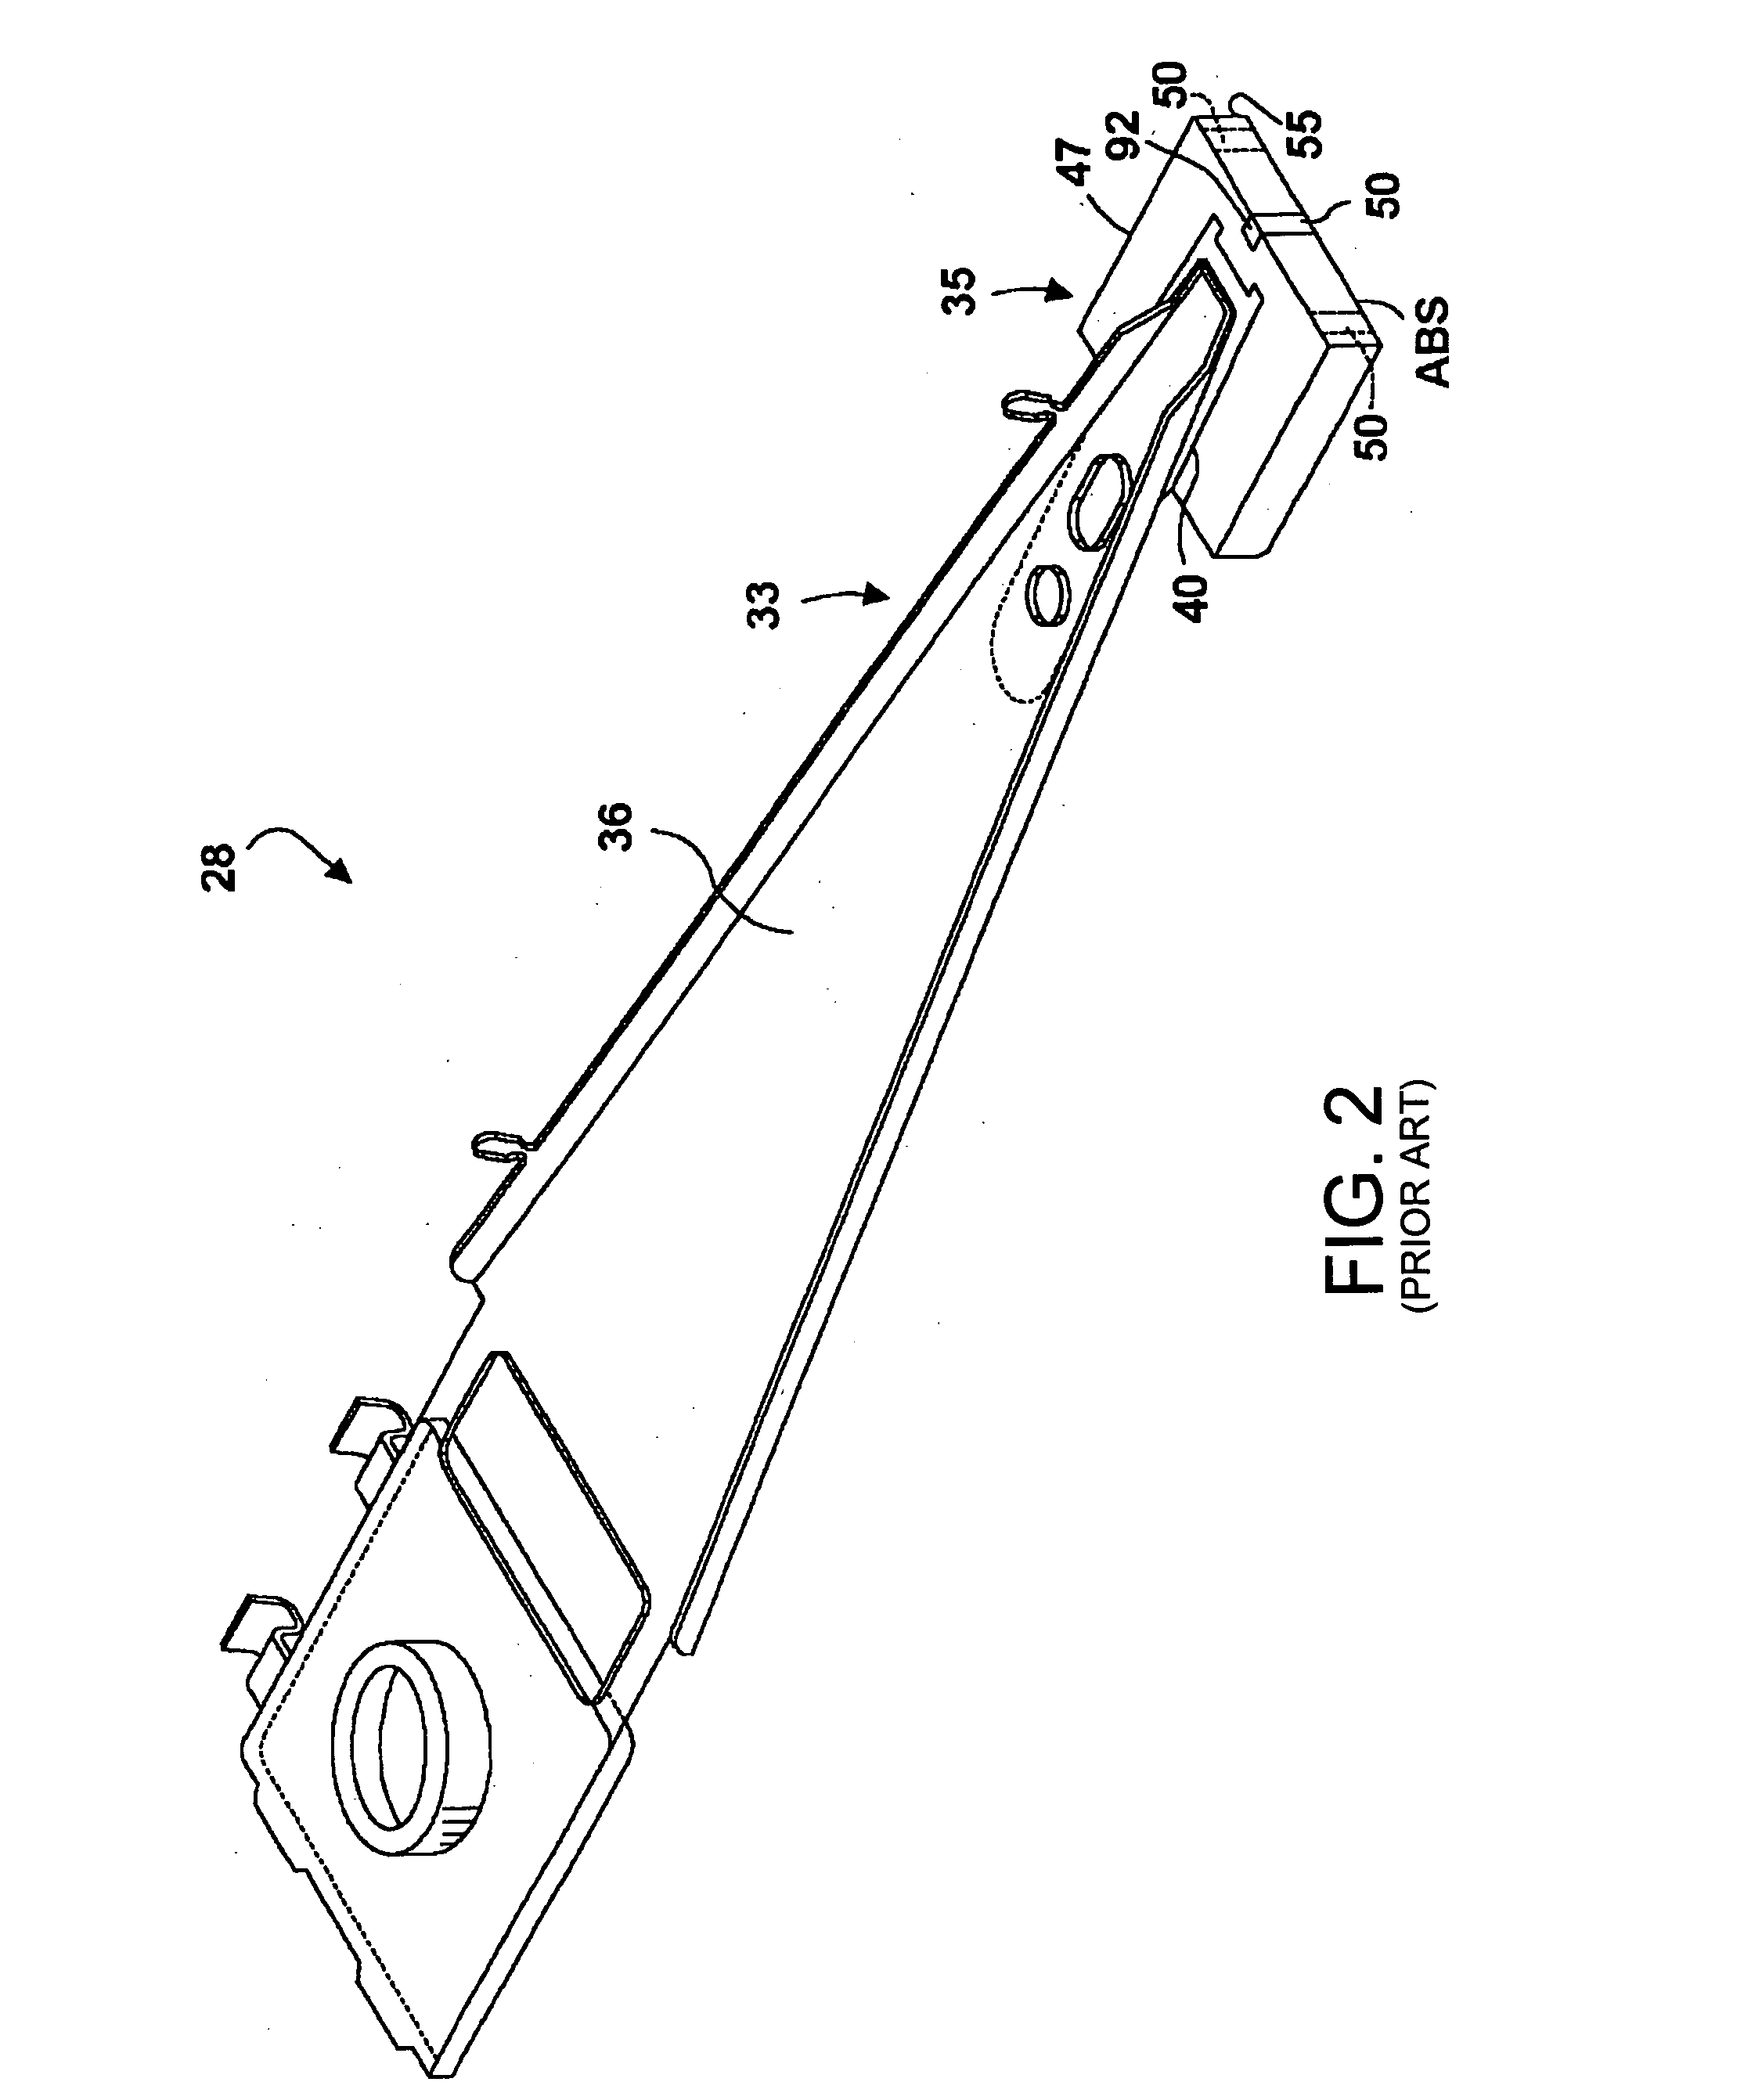 Magnetic thin film head with heat-assisted write section and hard disk drive incorporating same